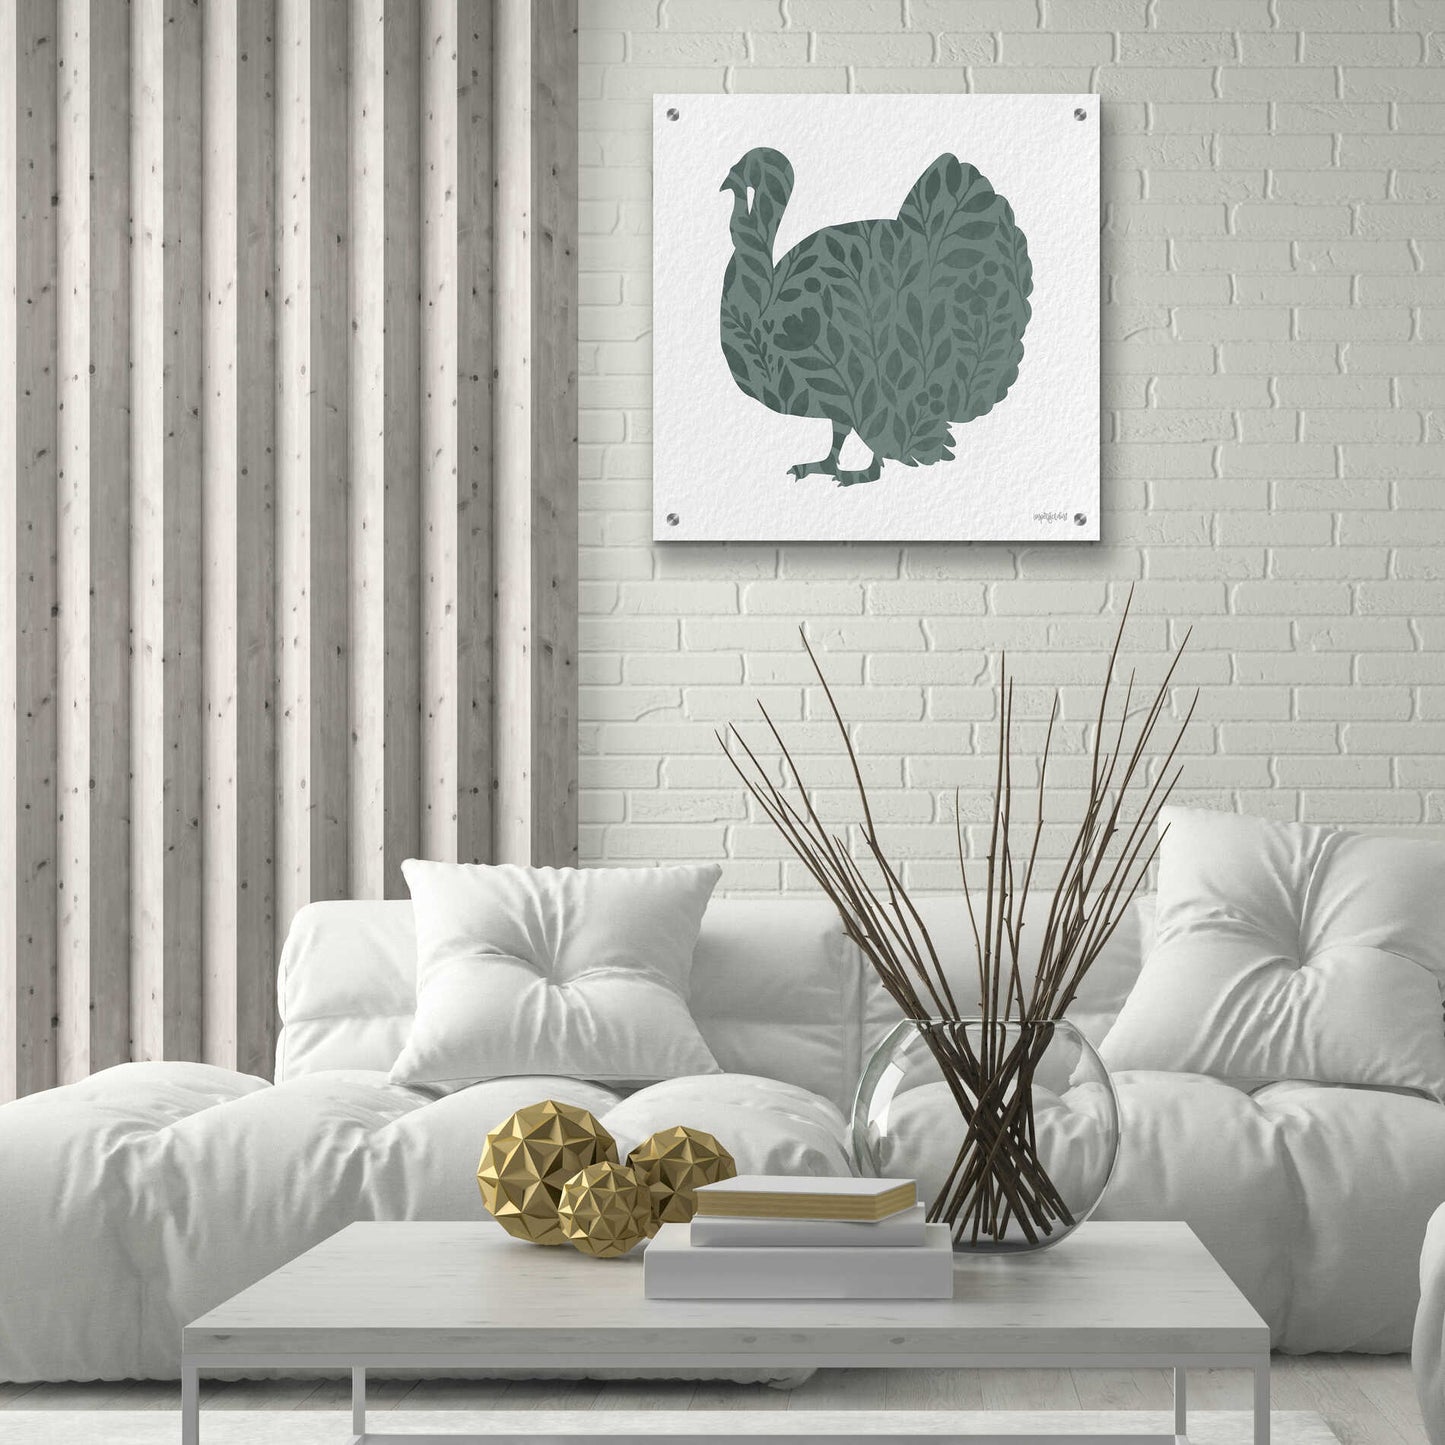 Epic Art 'Floral Turkey' by Imperfect Dust, Acrylic Glass Wall Art,24x24